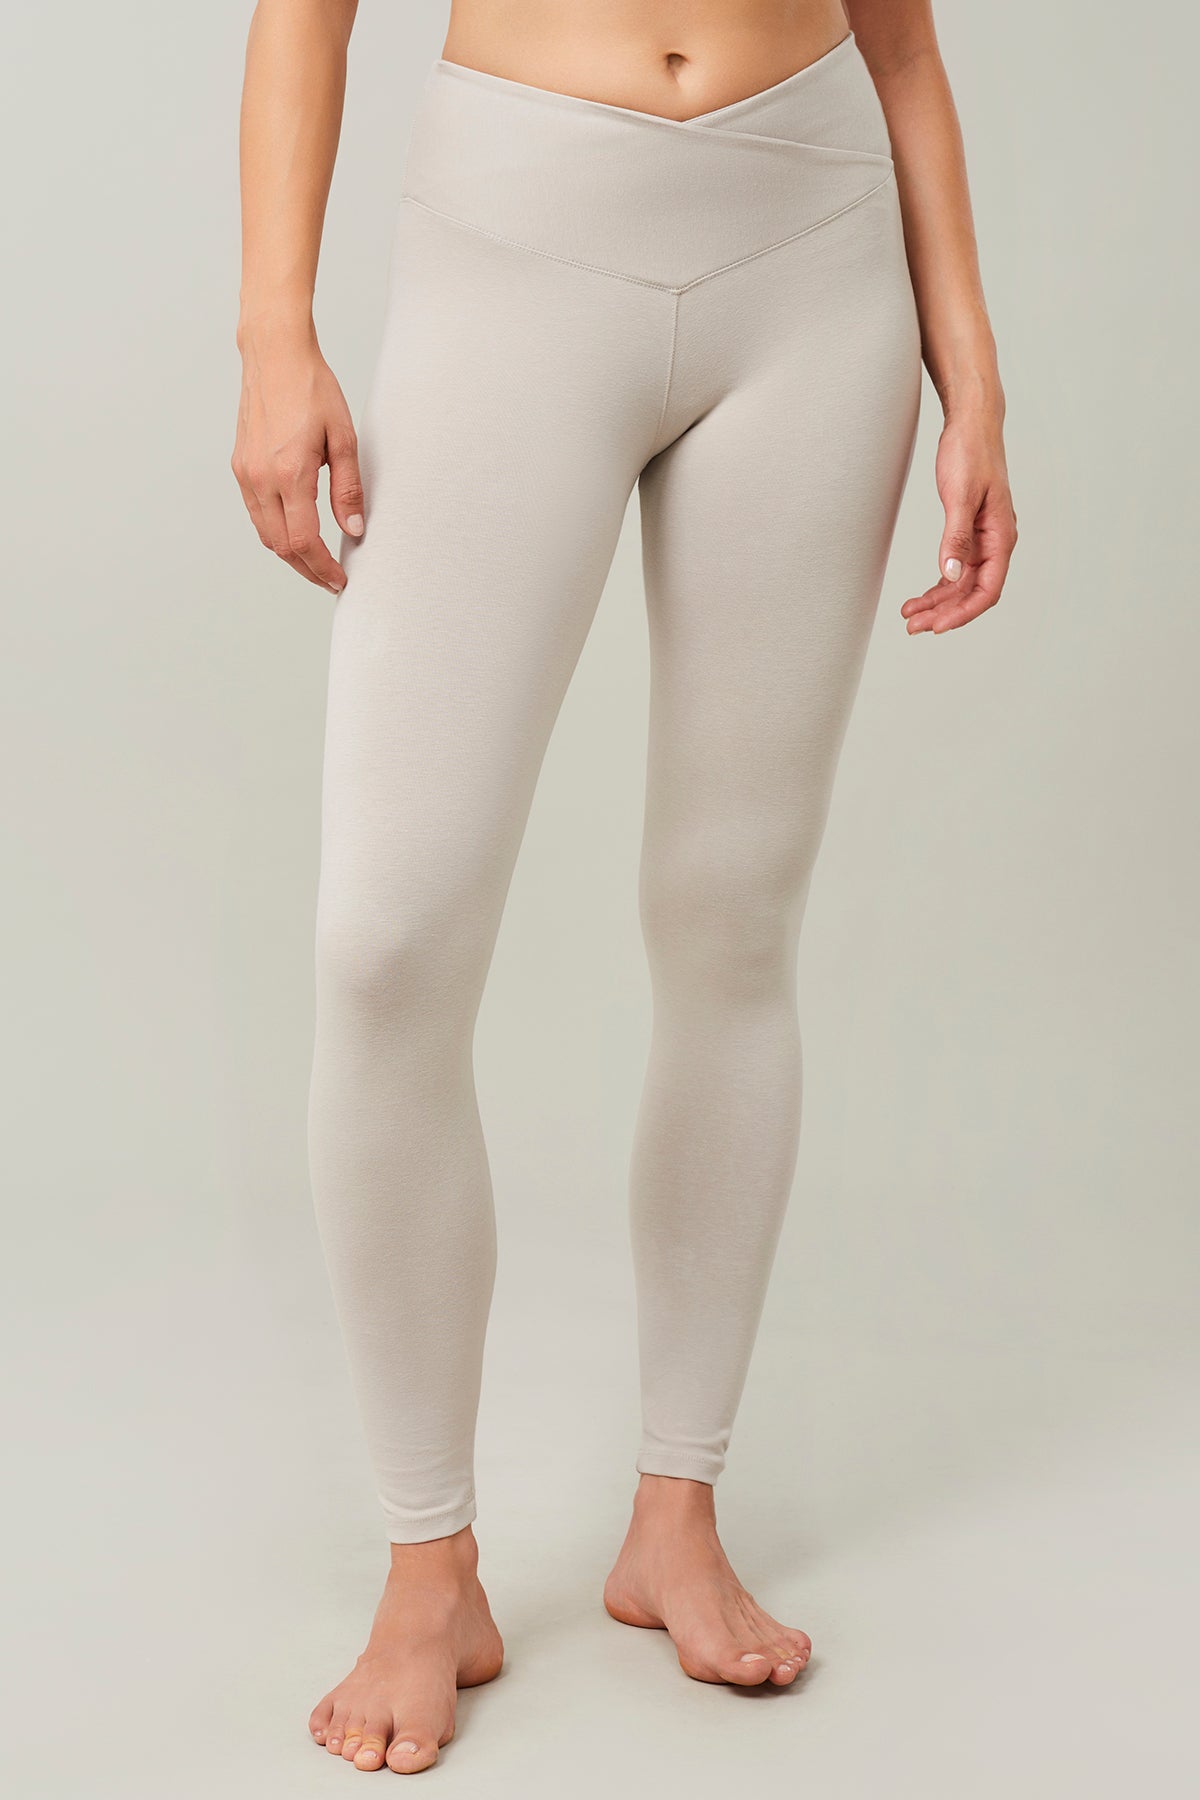 Rib Leggings made from GOTS certified Organic Cotton